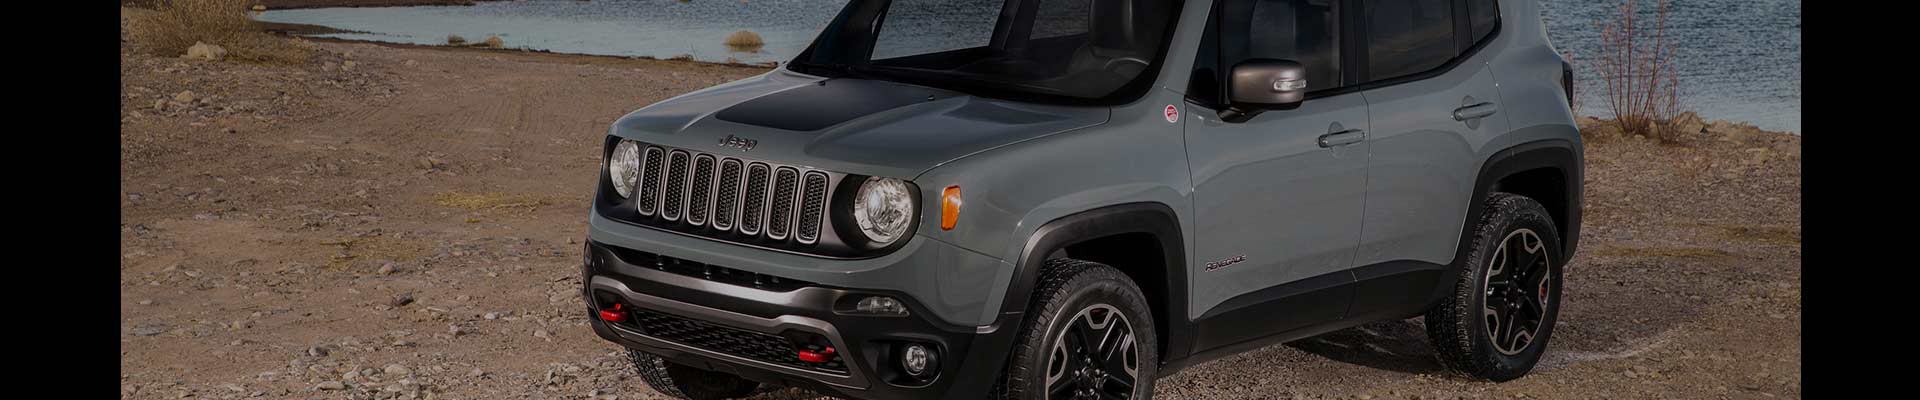 Shop Replacement and OEM 2020 Jeep Renegade Parts with Discounted Price on the Net